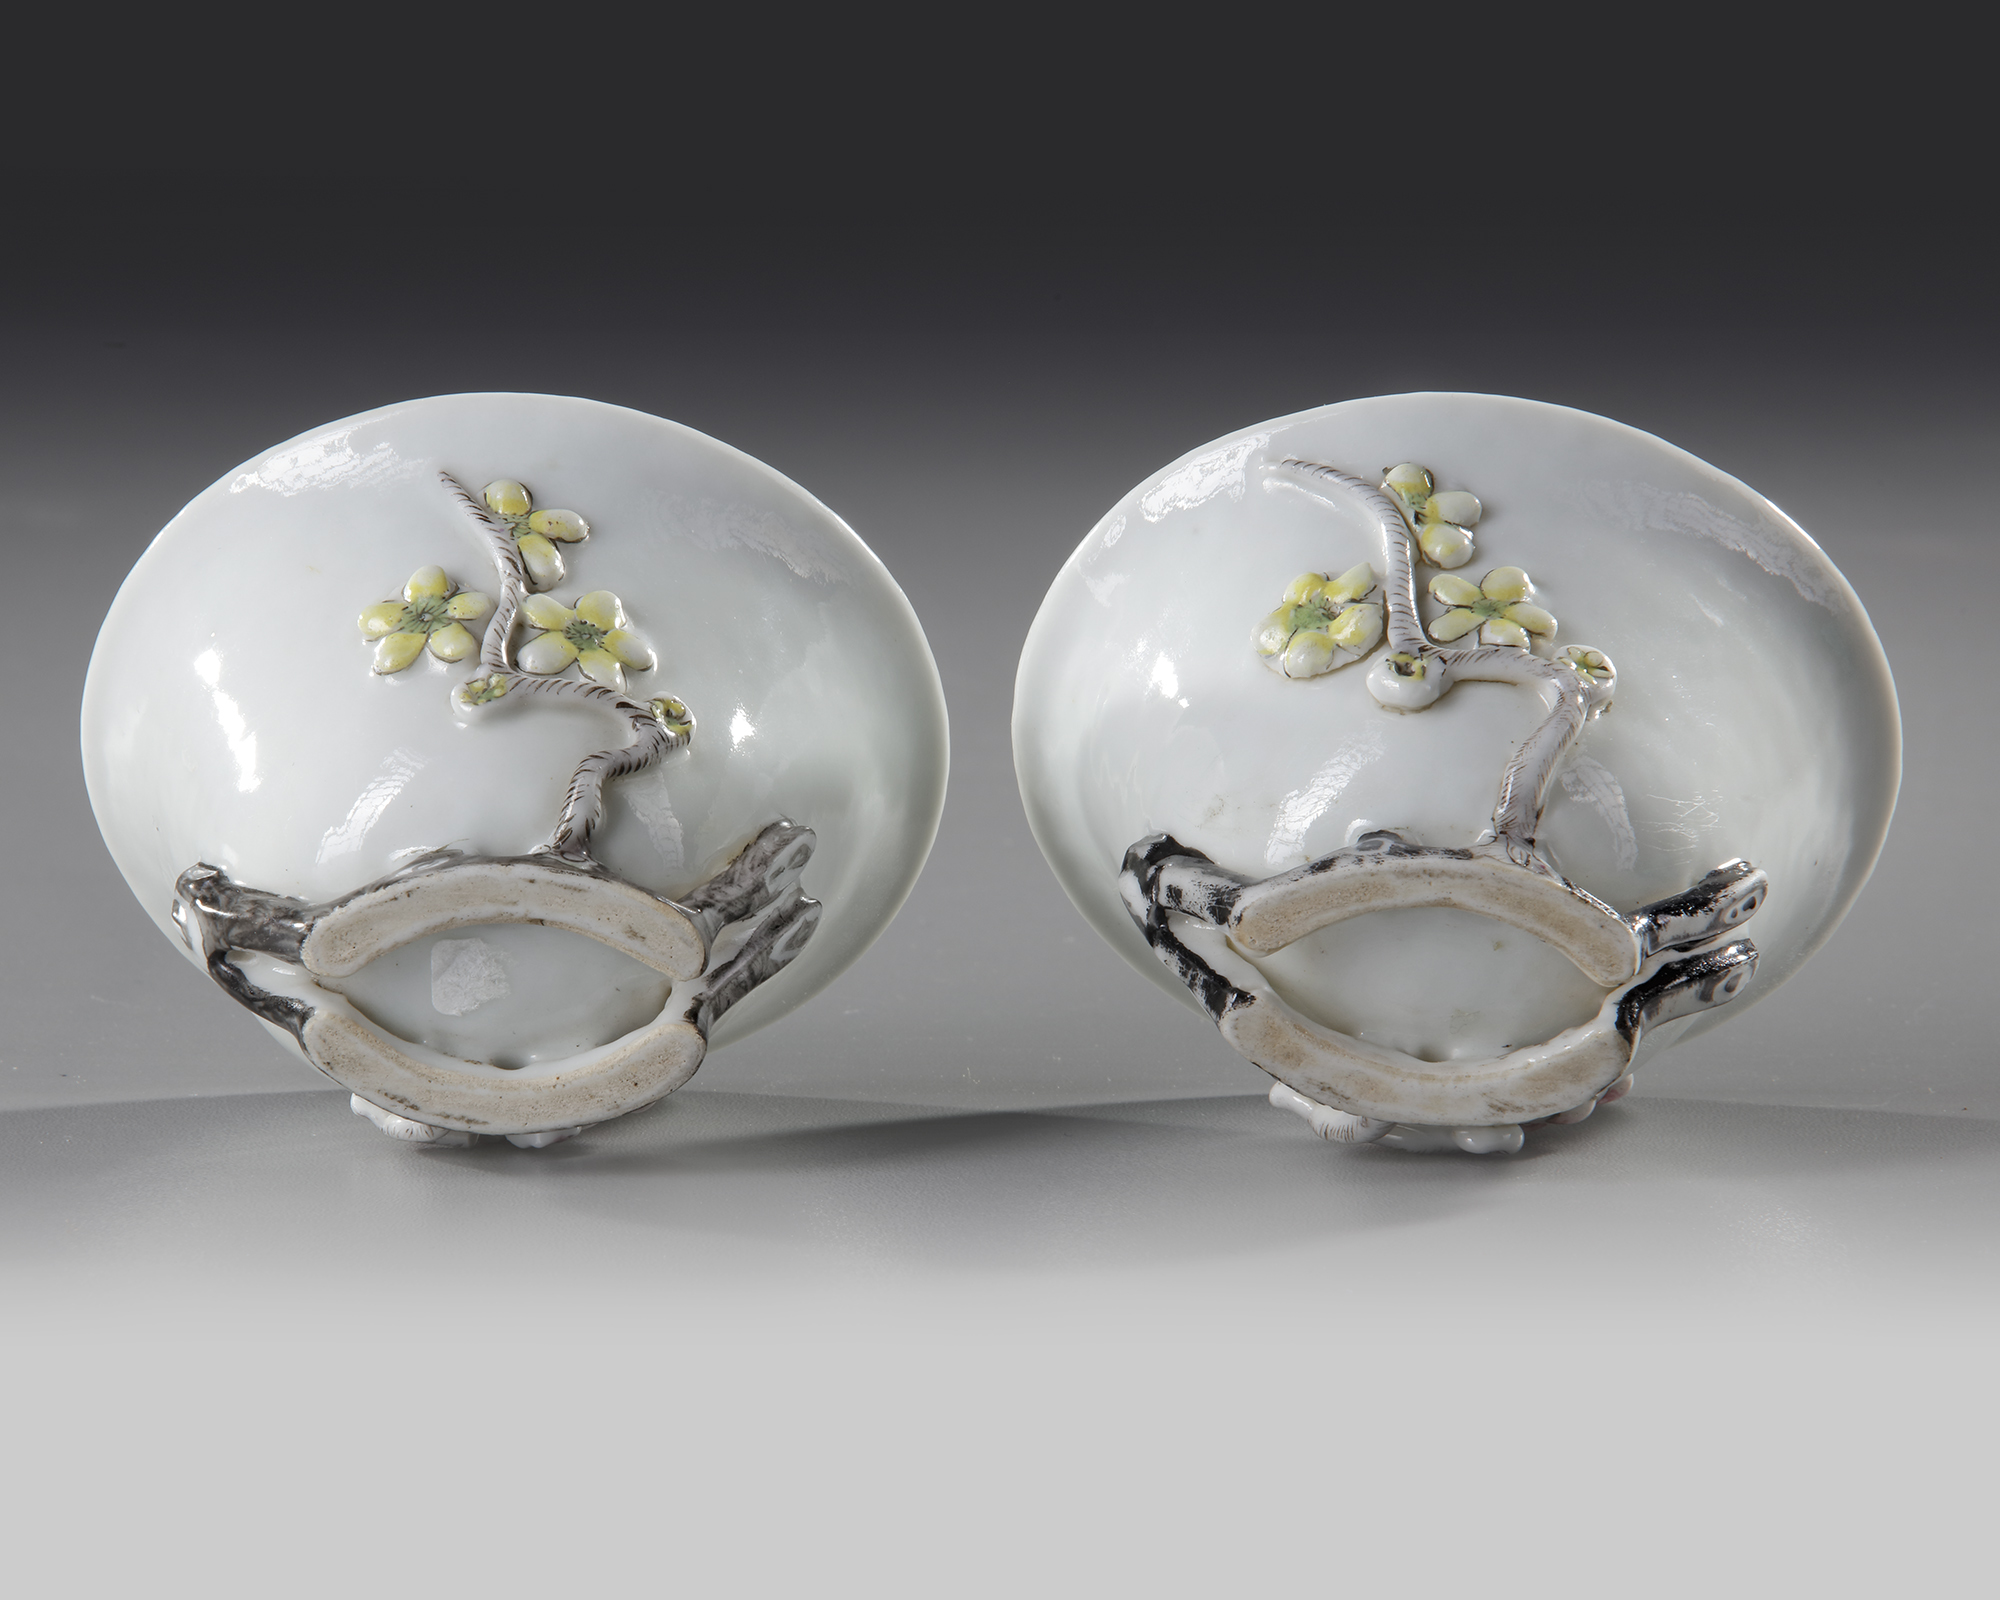 A PAIR OF CHINESE BLANC DE CHINE WINE CUPS, 18TH CENTURY - Image 3 of 4